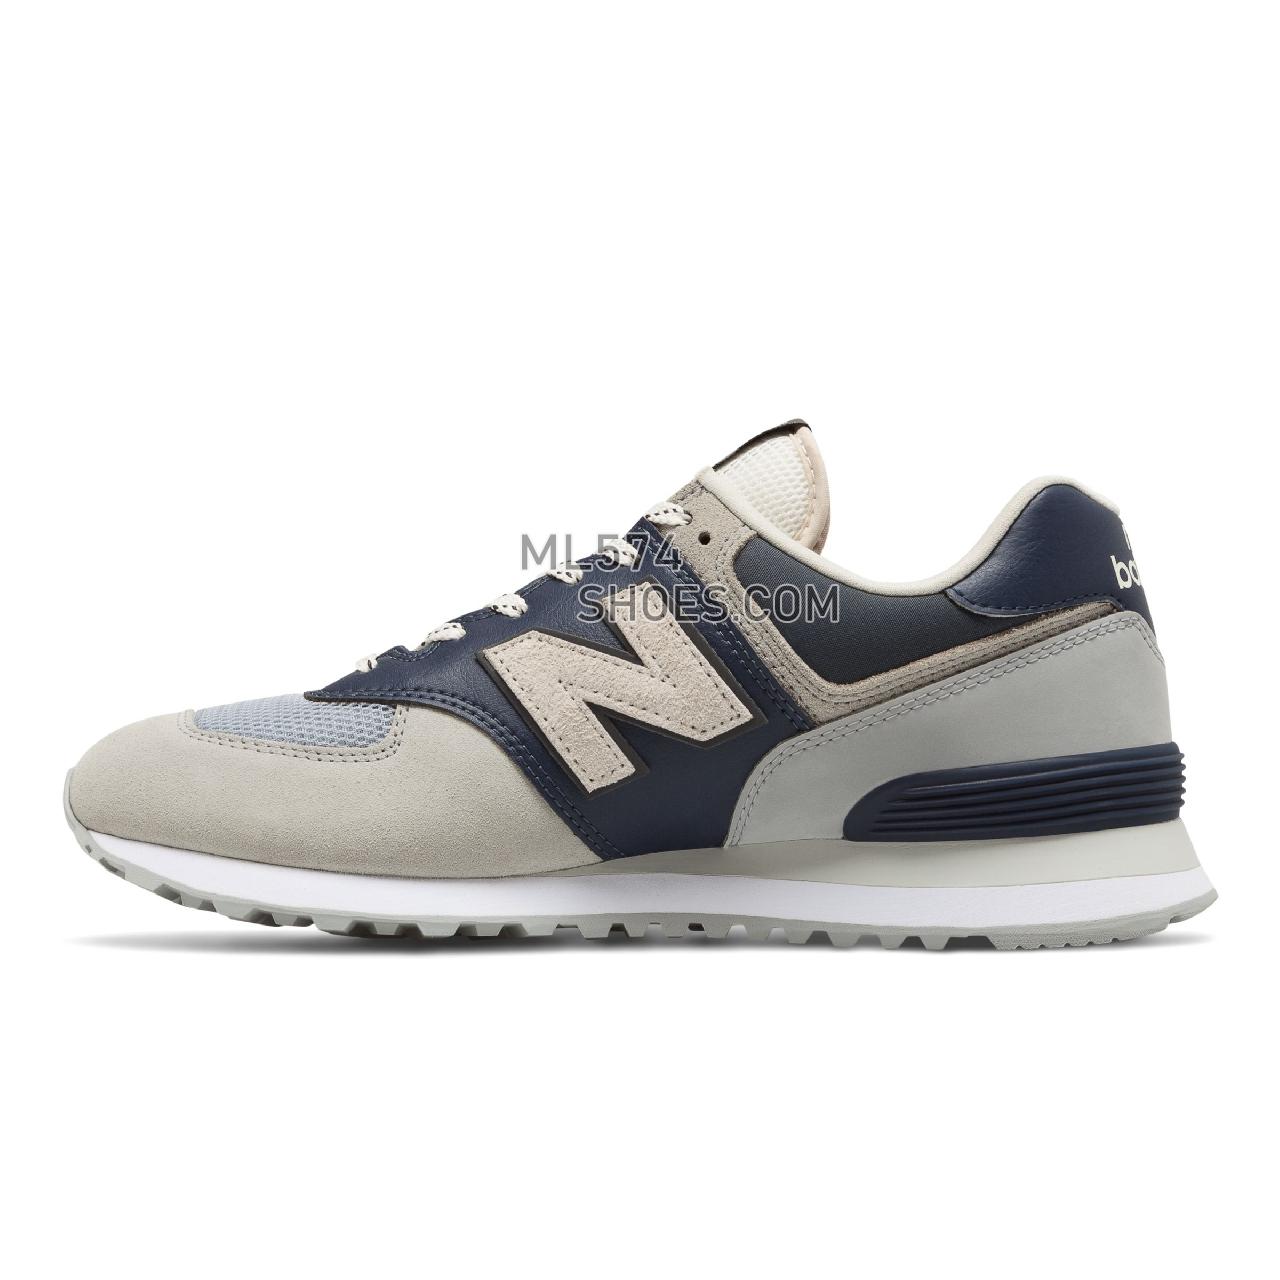 New Balance 574 - Men's Classic Sneakers - Grey with Blue - ML574MX